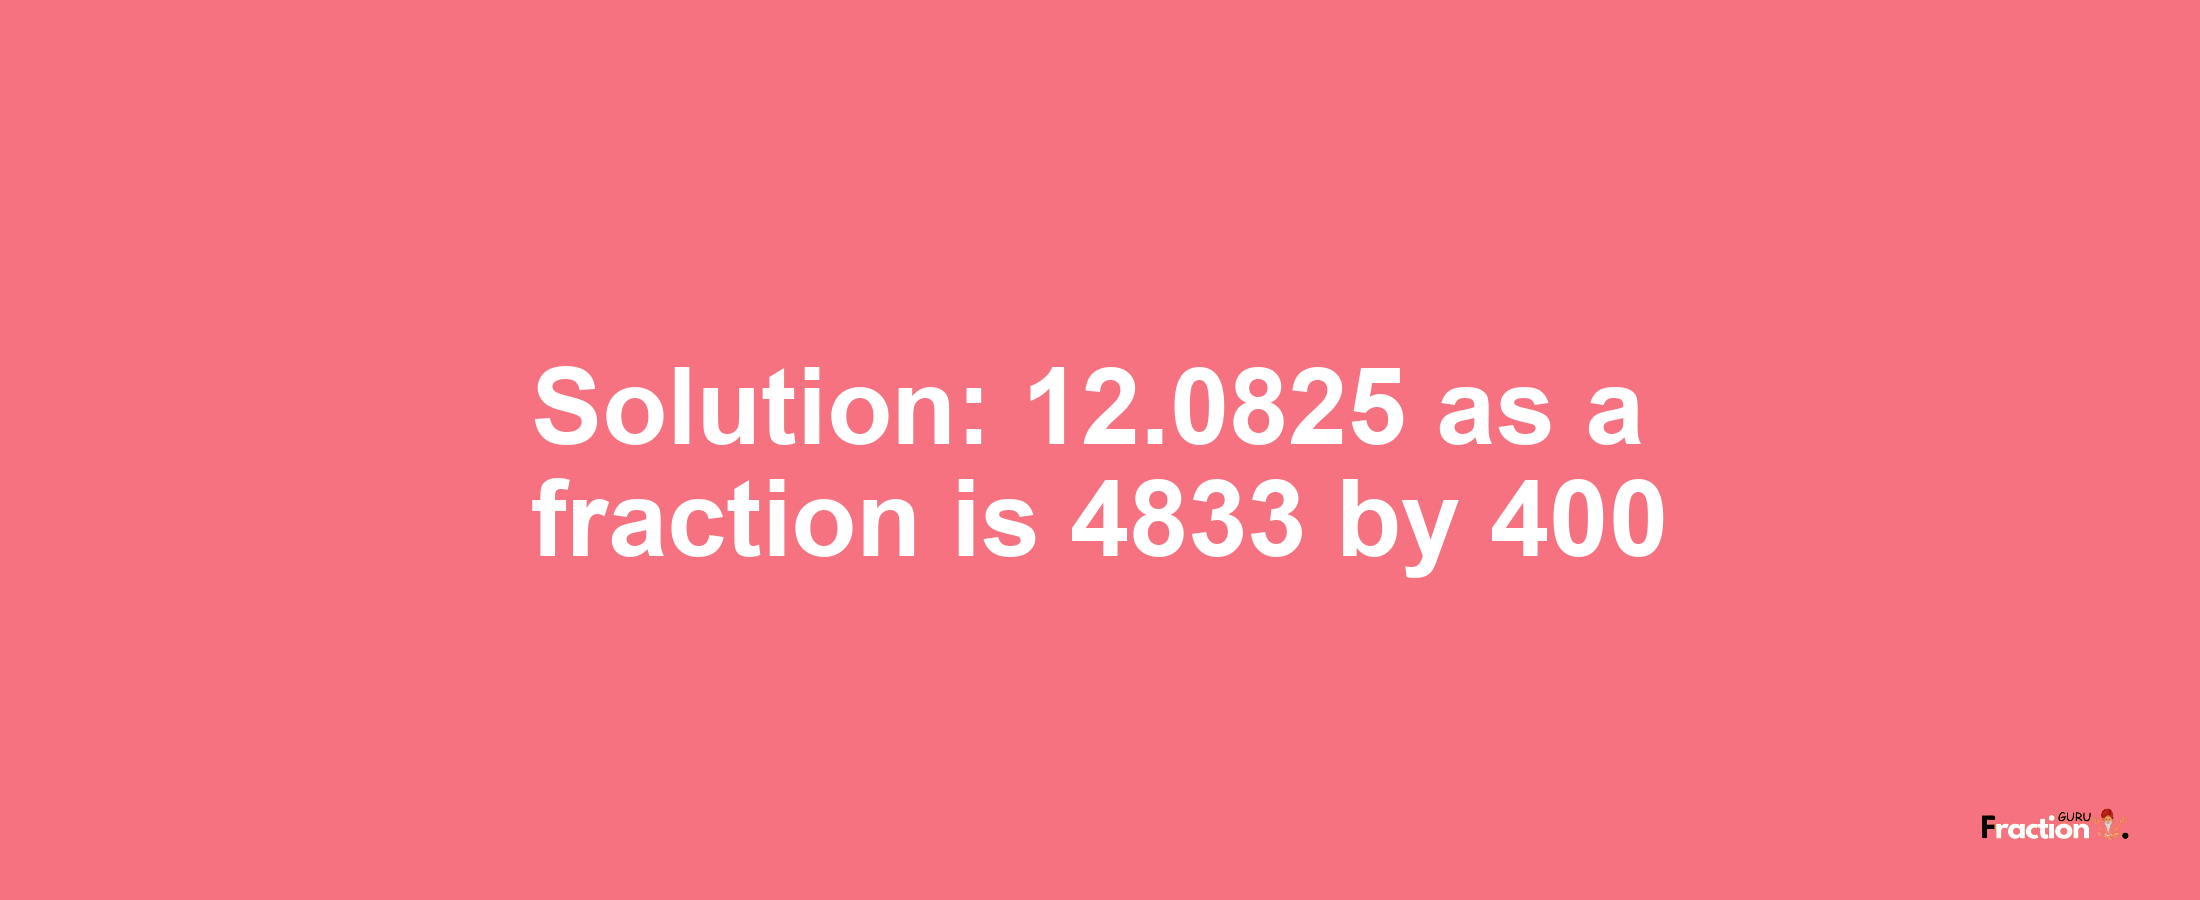 Solution:12.0825 as a fraction is 4833/400